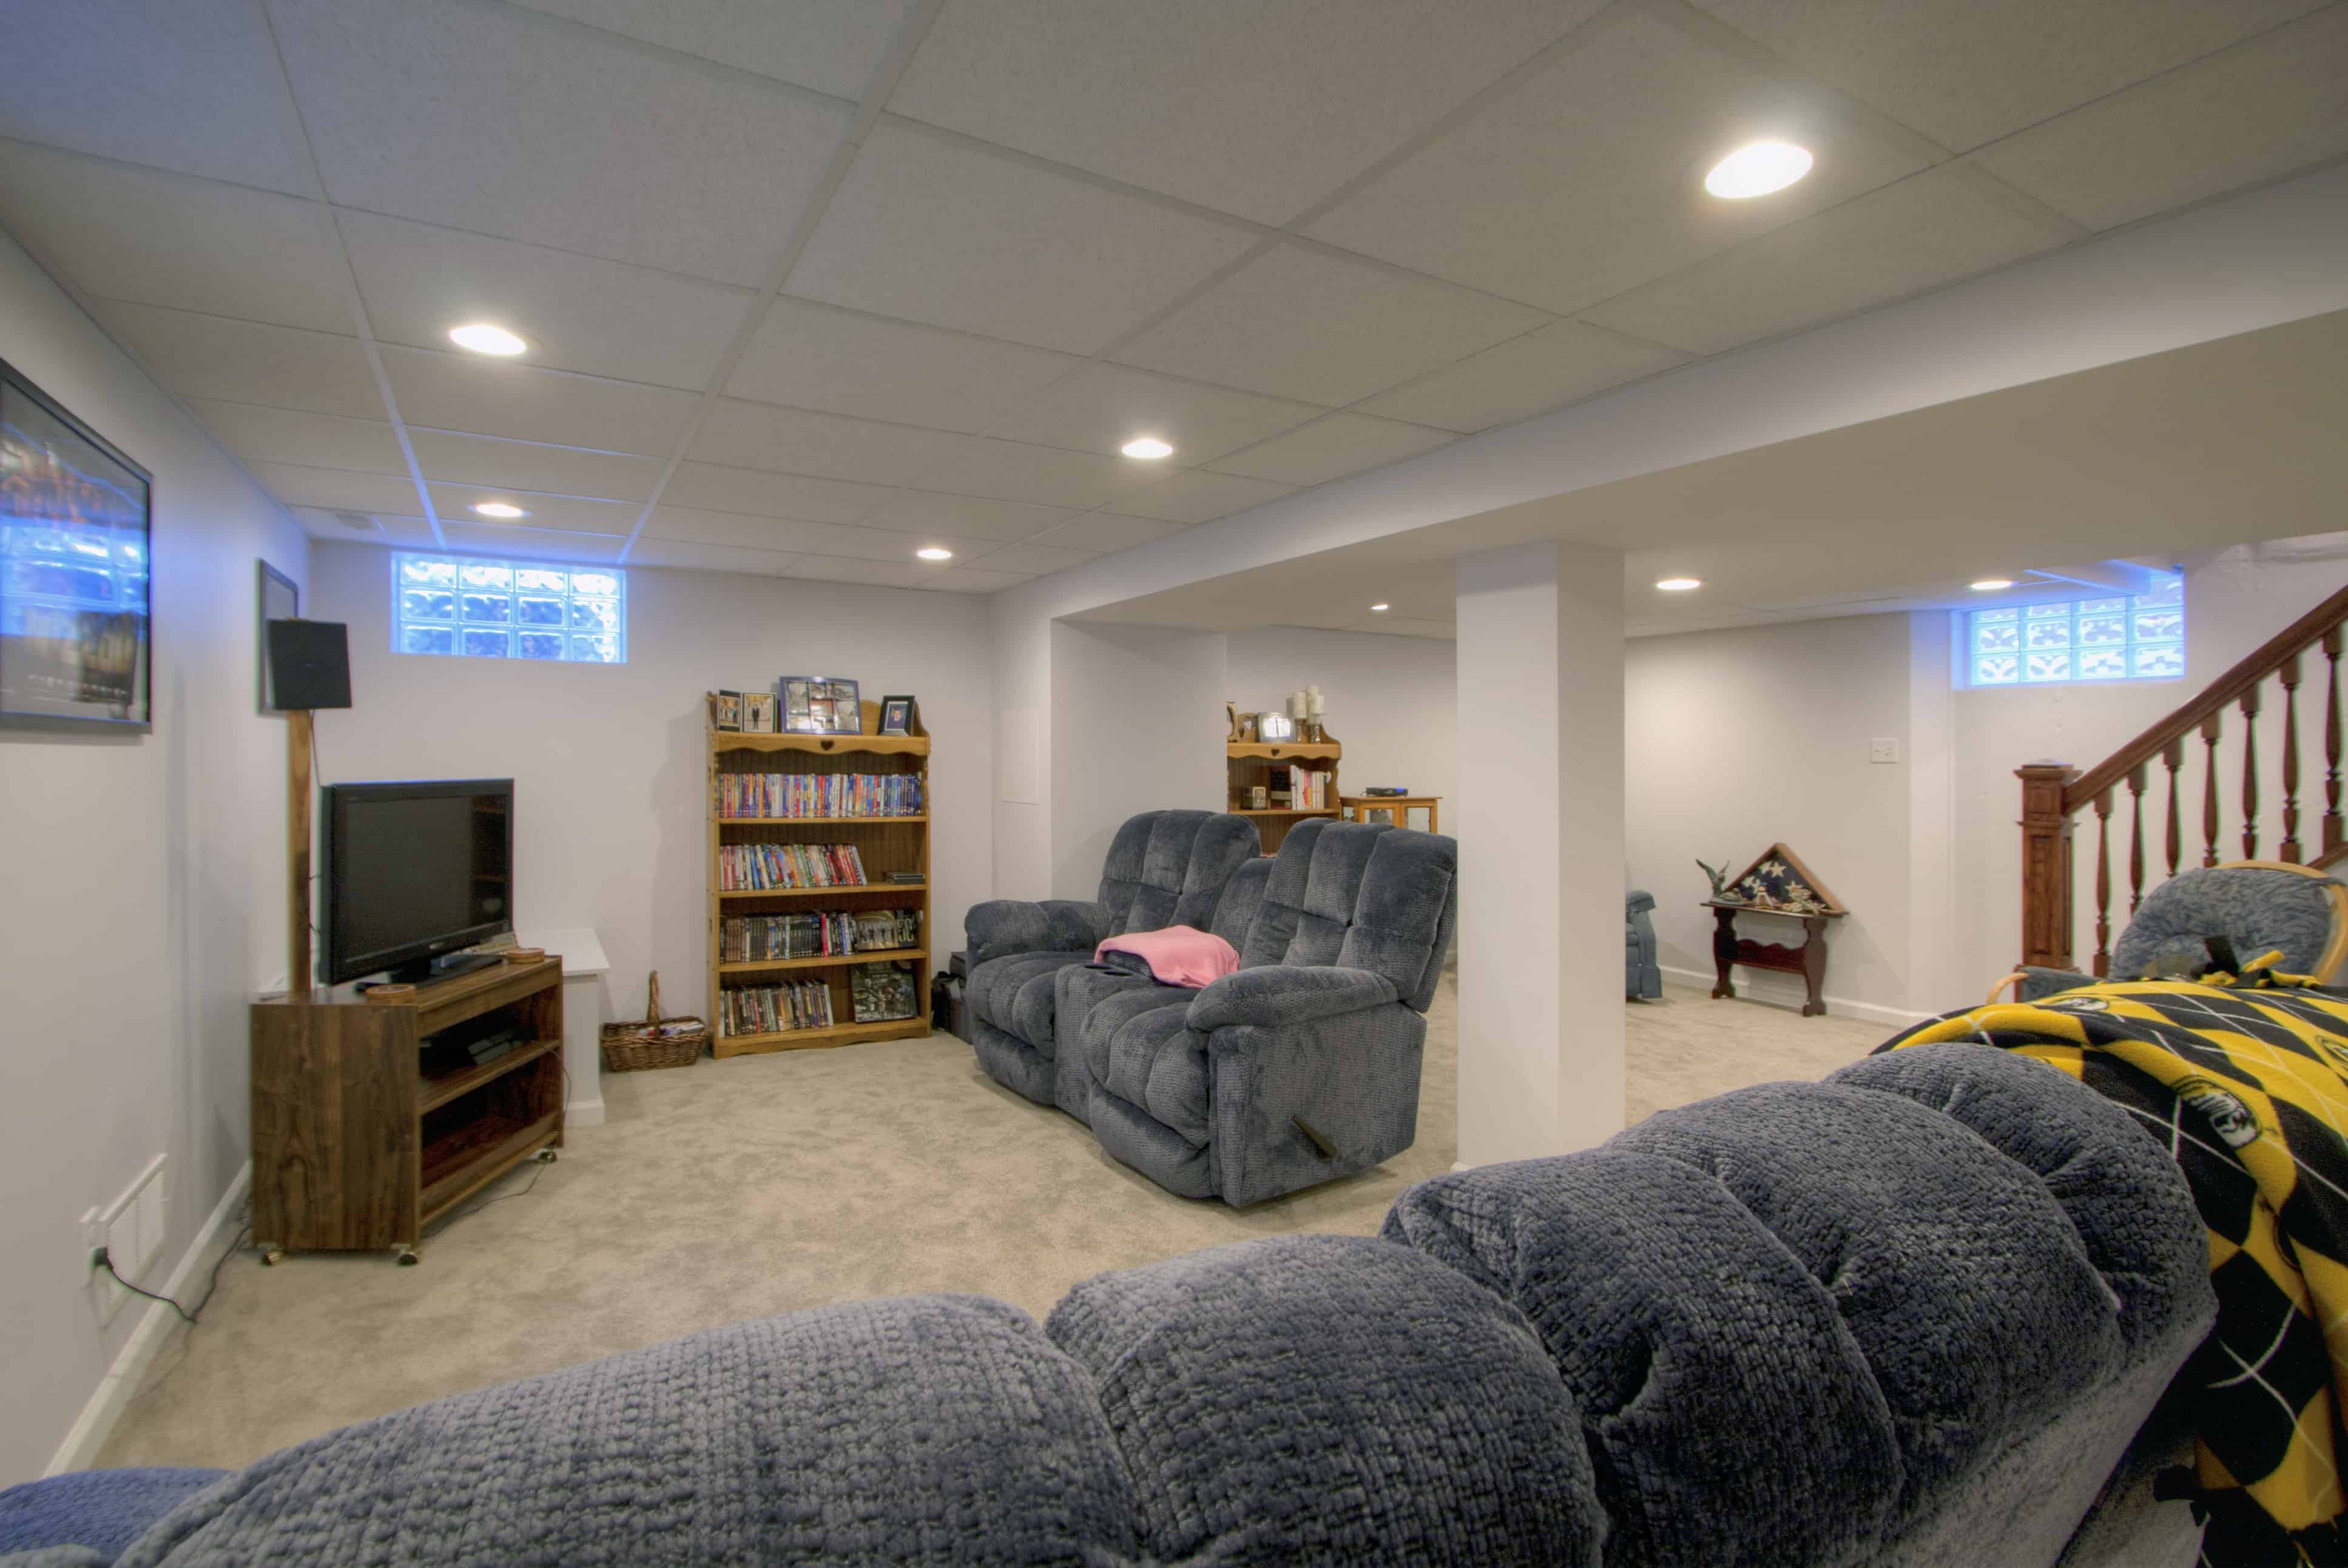 How To Drywall A Basement Ceiling | TcWorks.Org